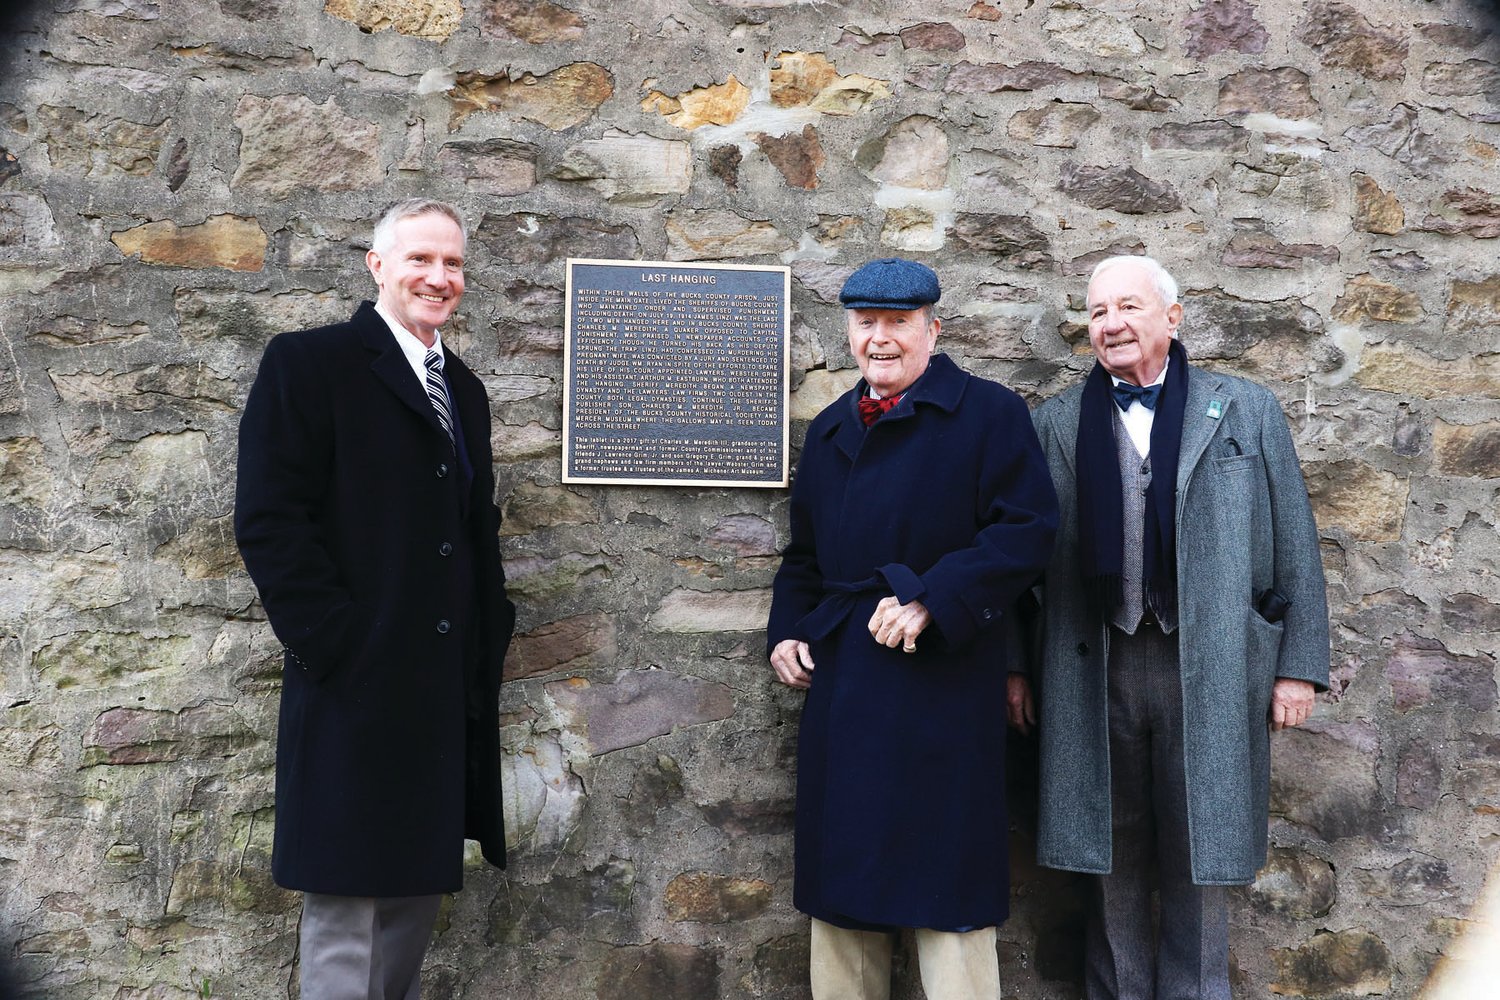 Charles Meredith, center, Larry Grim, right, and his son Gregory Grimm, left, stand by a new plaque on the walls of the old Bucks County Prison. The title is “Last Hanging.” It tells the tale of Charles Meredith’s grandfather, the Bucks County sheriff (who was in charge of the execution), and Larry Grim’s  great-uncle, who was the court appointed public defender for the convicted murderer. Photograph by Rebecca Rosen